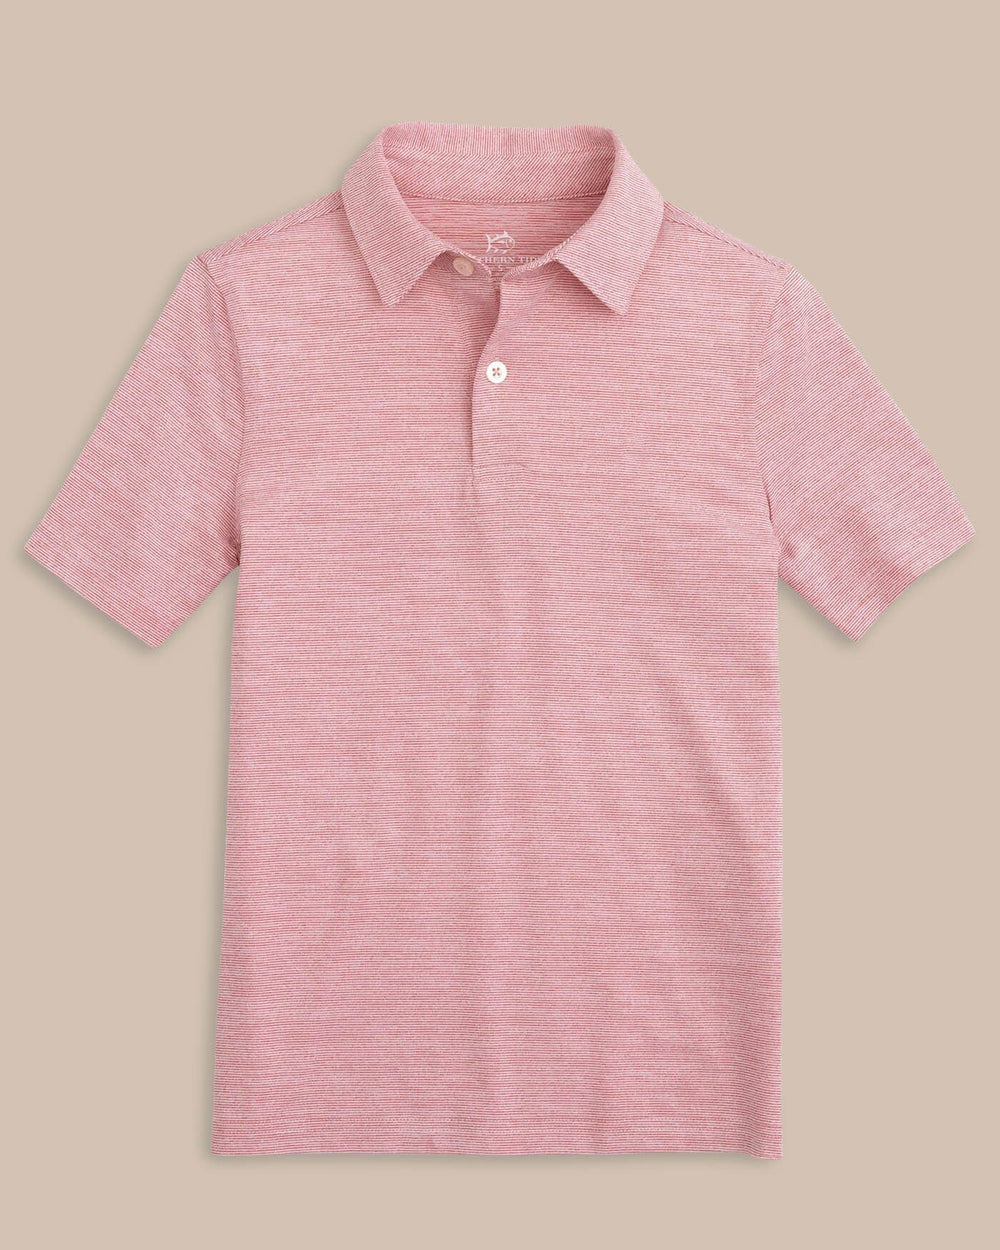 The front view of the Southern Tide Team Colors Boy's Driver Spacedye Polo Shirt by Southern Tide - Varsity Red